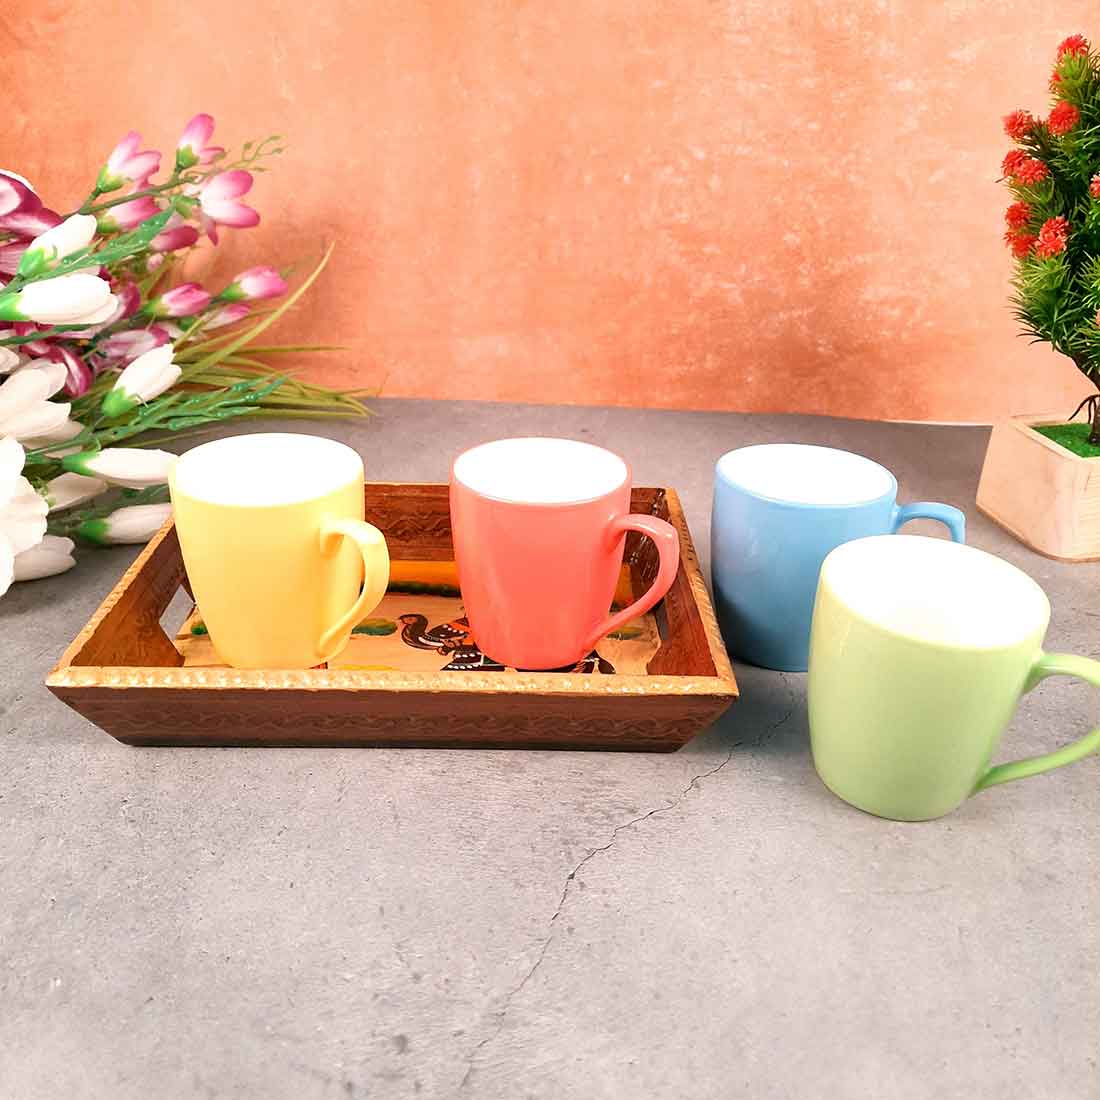 Decorative Tray | Wooden Serving Tray - For Tea & Snack Serving and Organising - 9 Inch - Apkamart#Style_Pack of 2